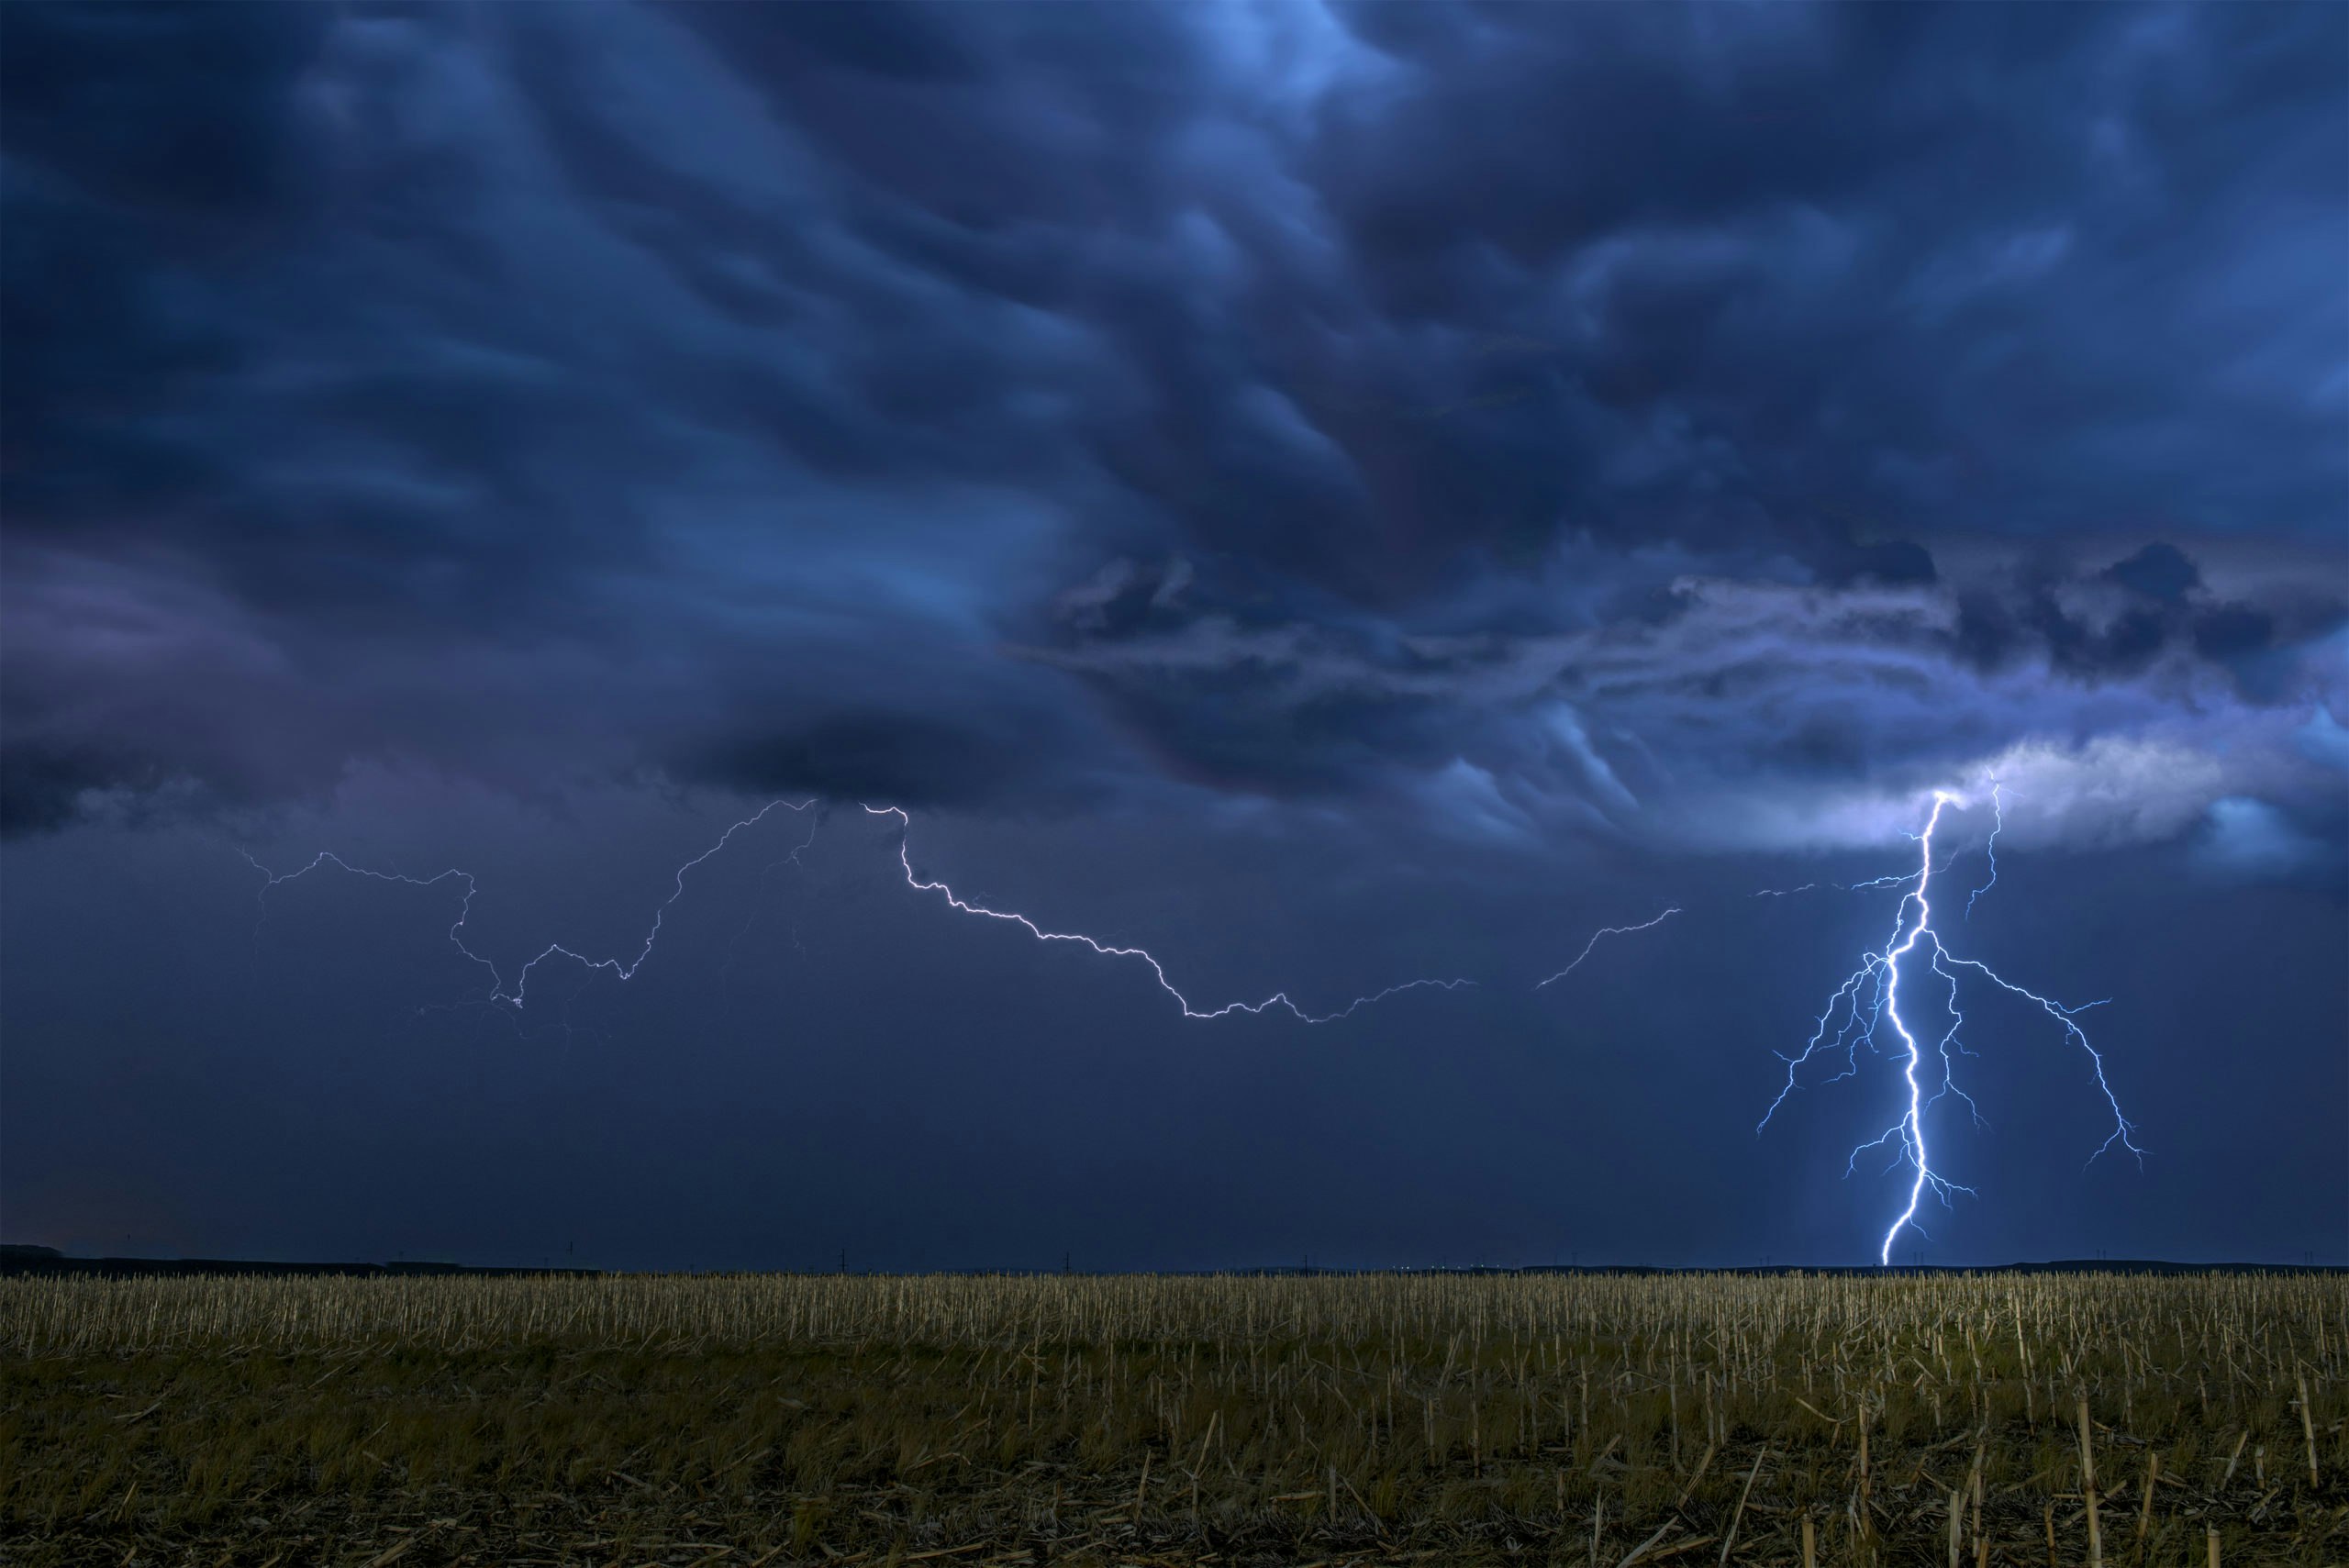 Lightning storm over field in oklahoma 637 KGTD scaled